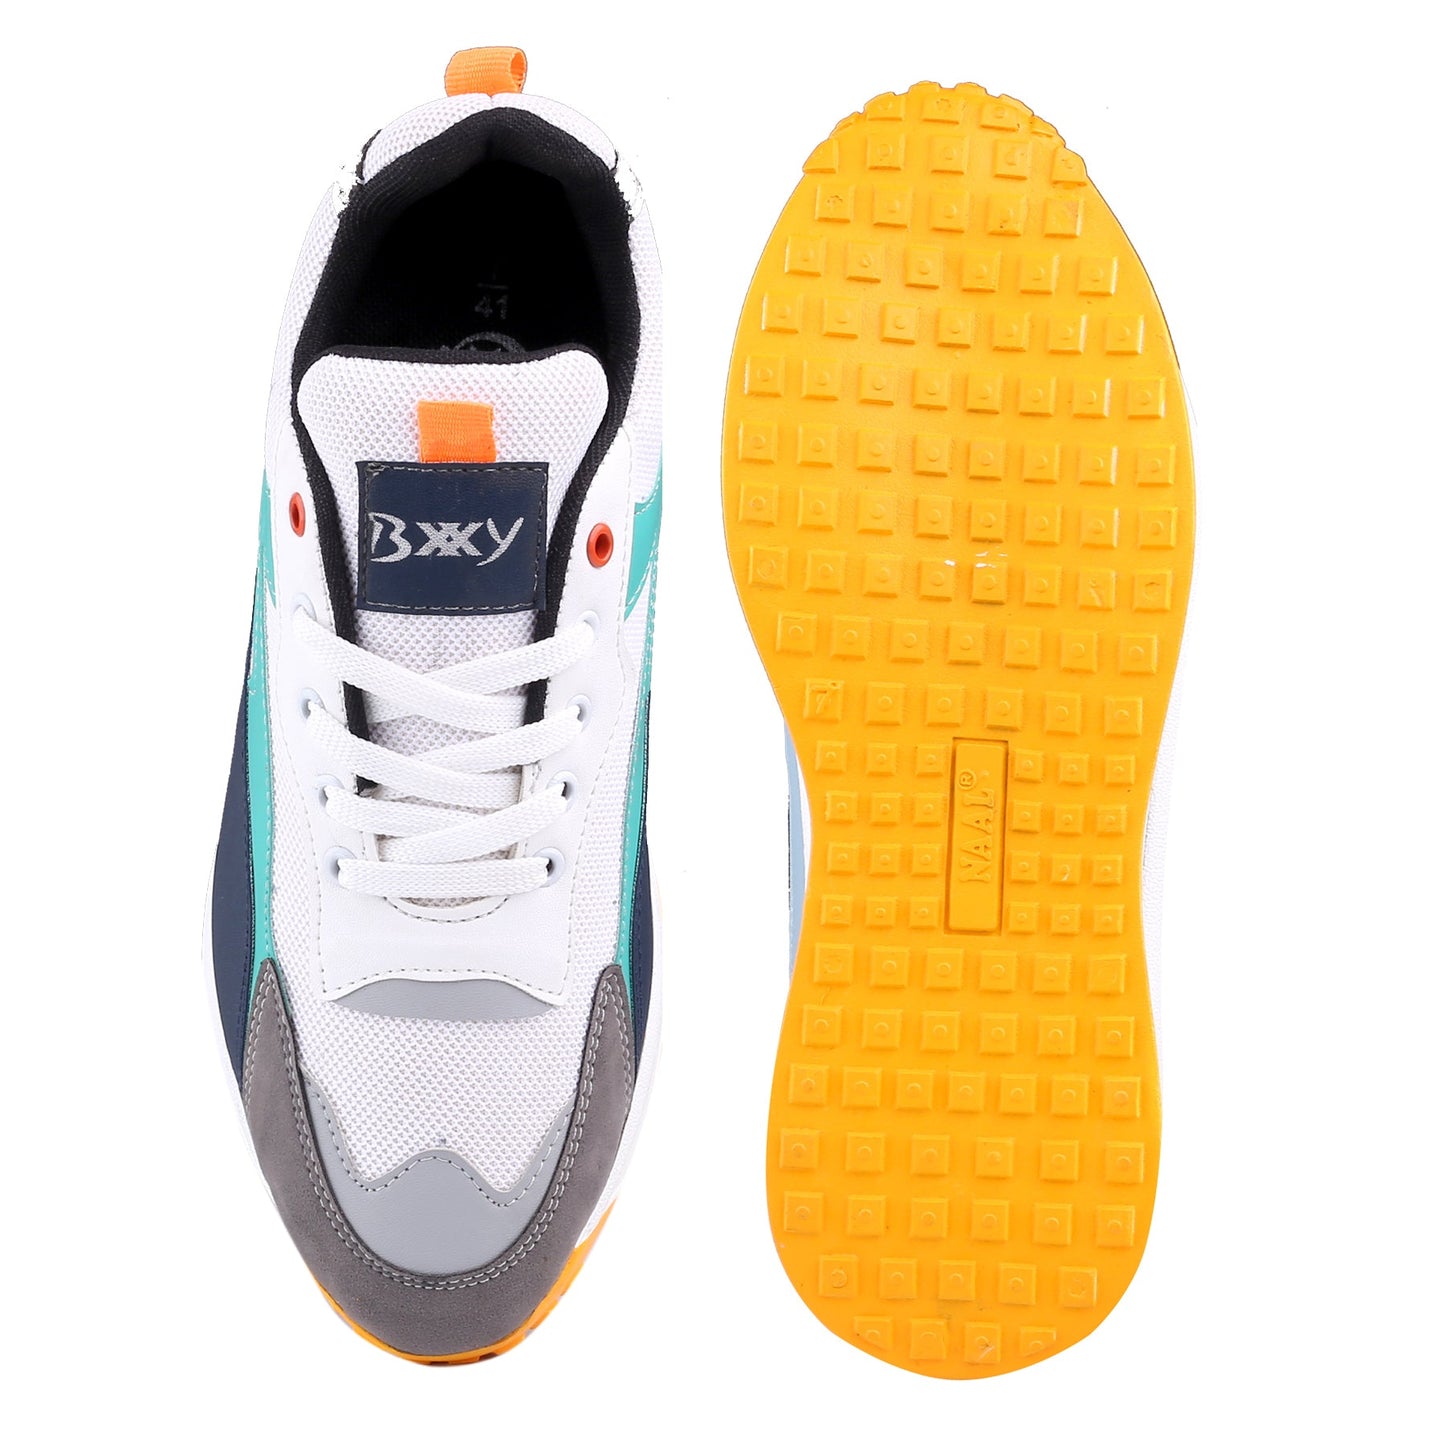 Bxxy's 3 Inch Hidden Height Increasing Breathable Lace-up Sports Shoes